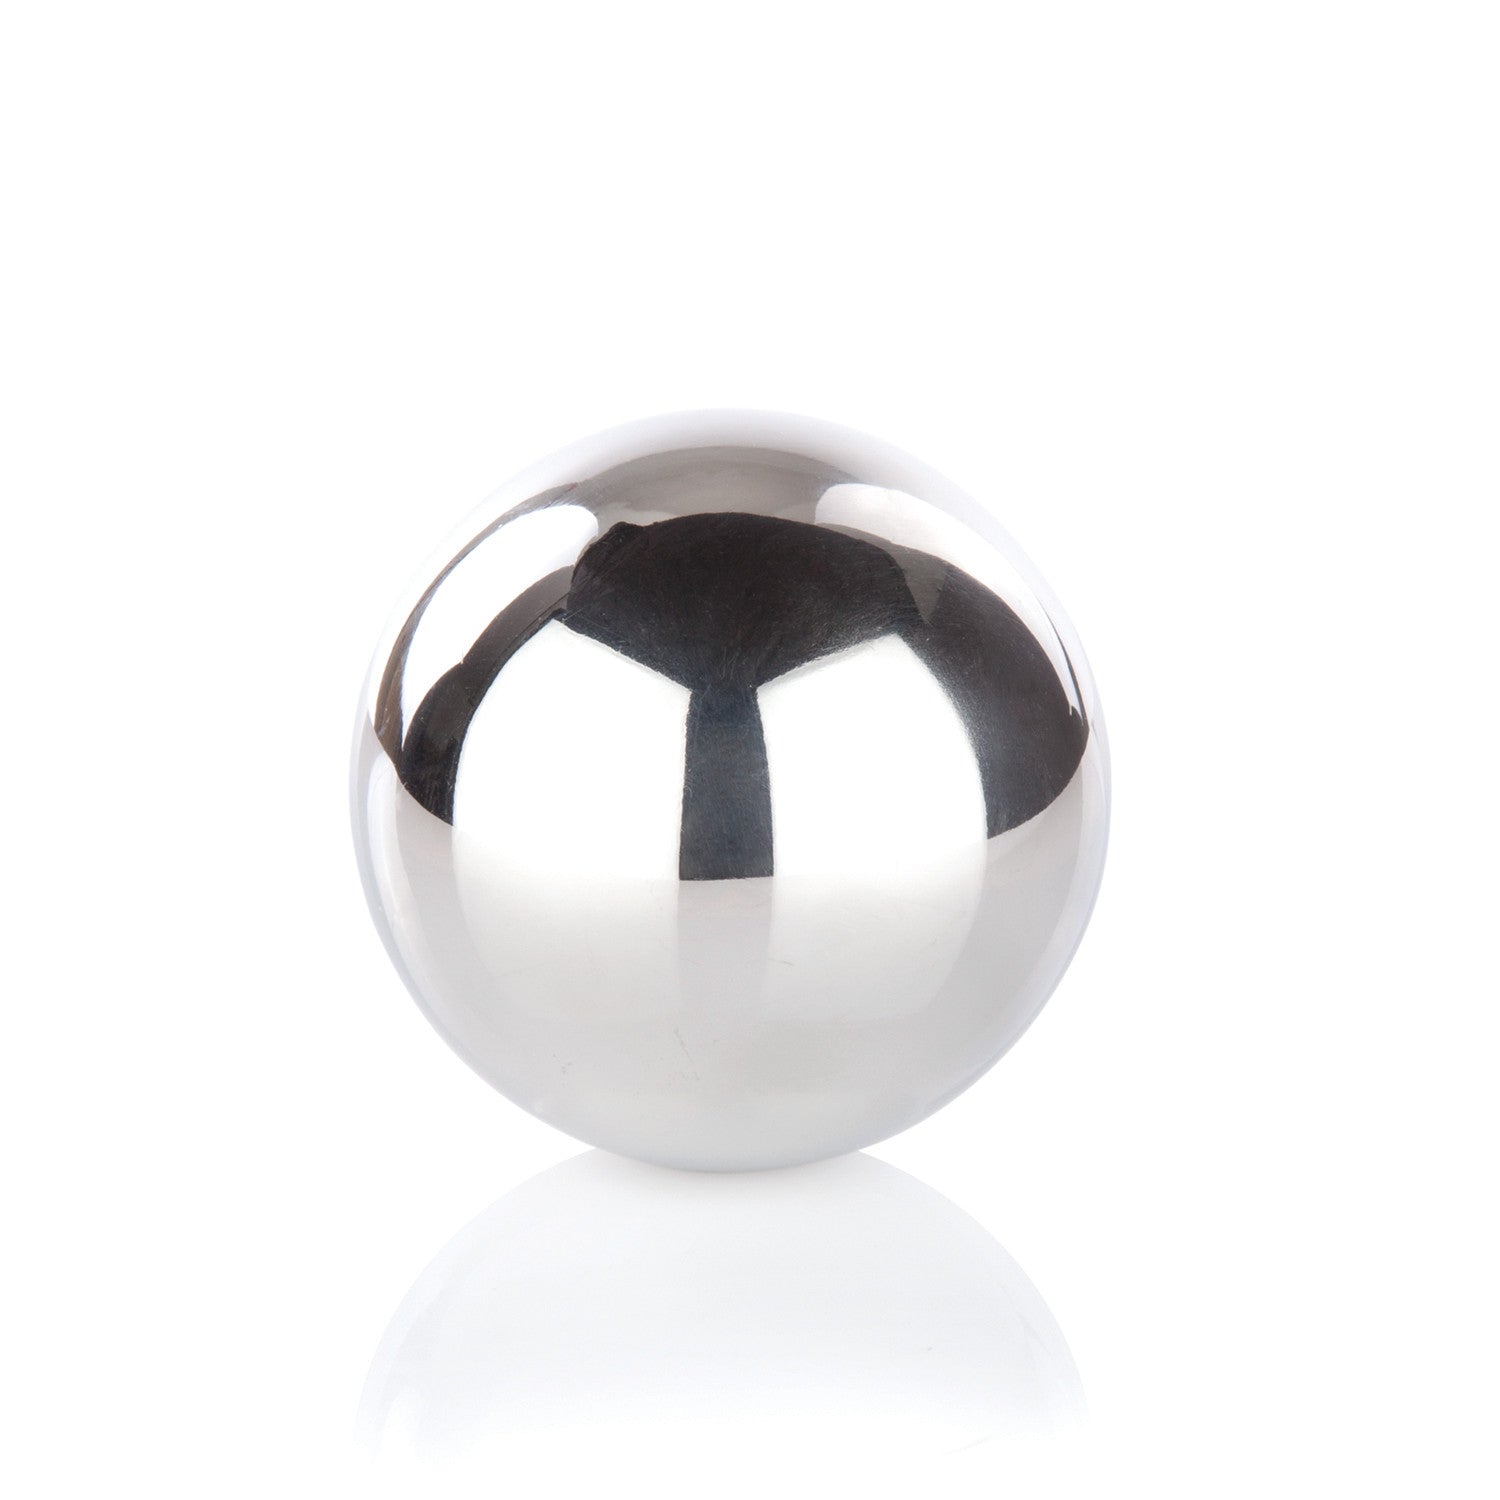 LoBalls are stainless steel chilling spheres that can be used to chill your  whiskey – SipDark